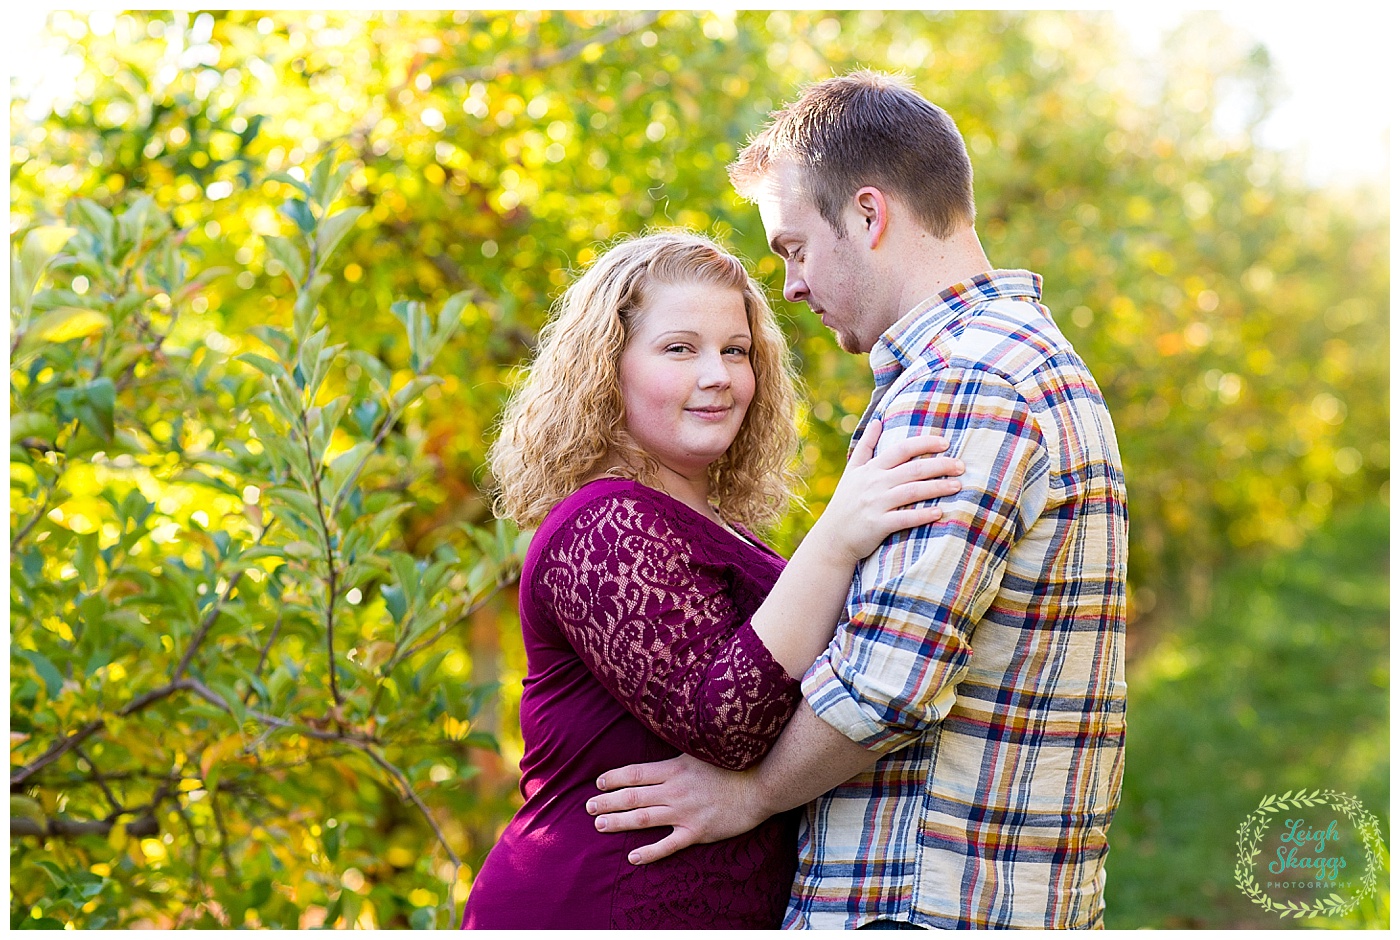 Katie and Matt are Engaged!!  A Carter Mountain Orchard Engagement session in Charlottesville Virginia!